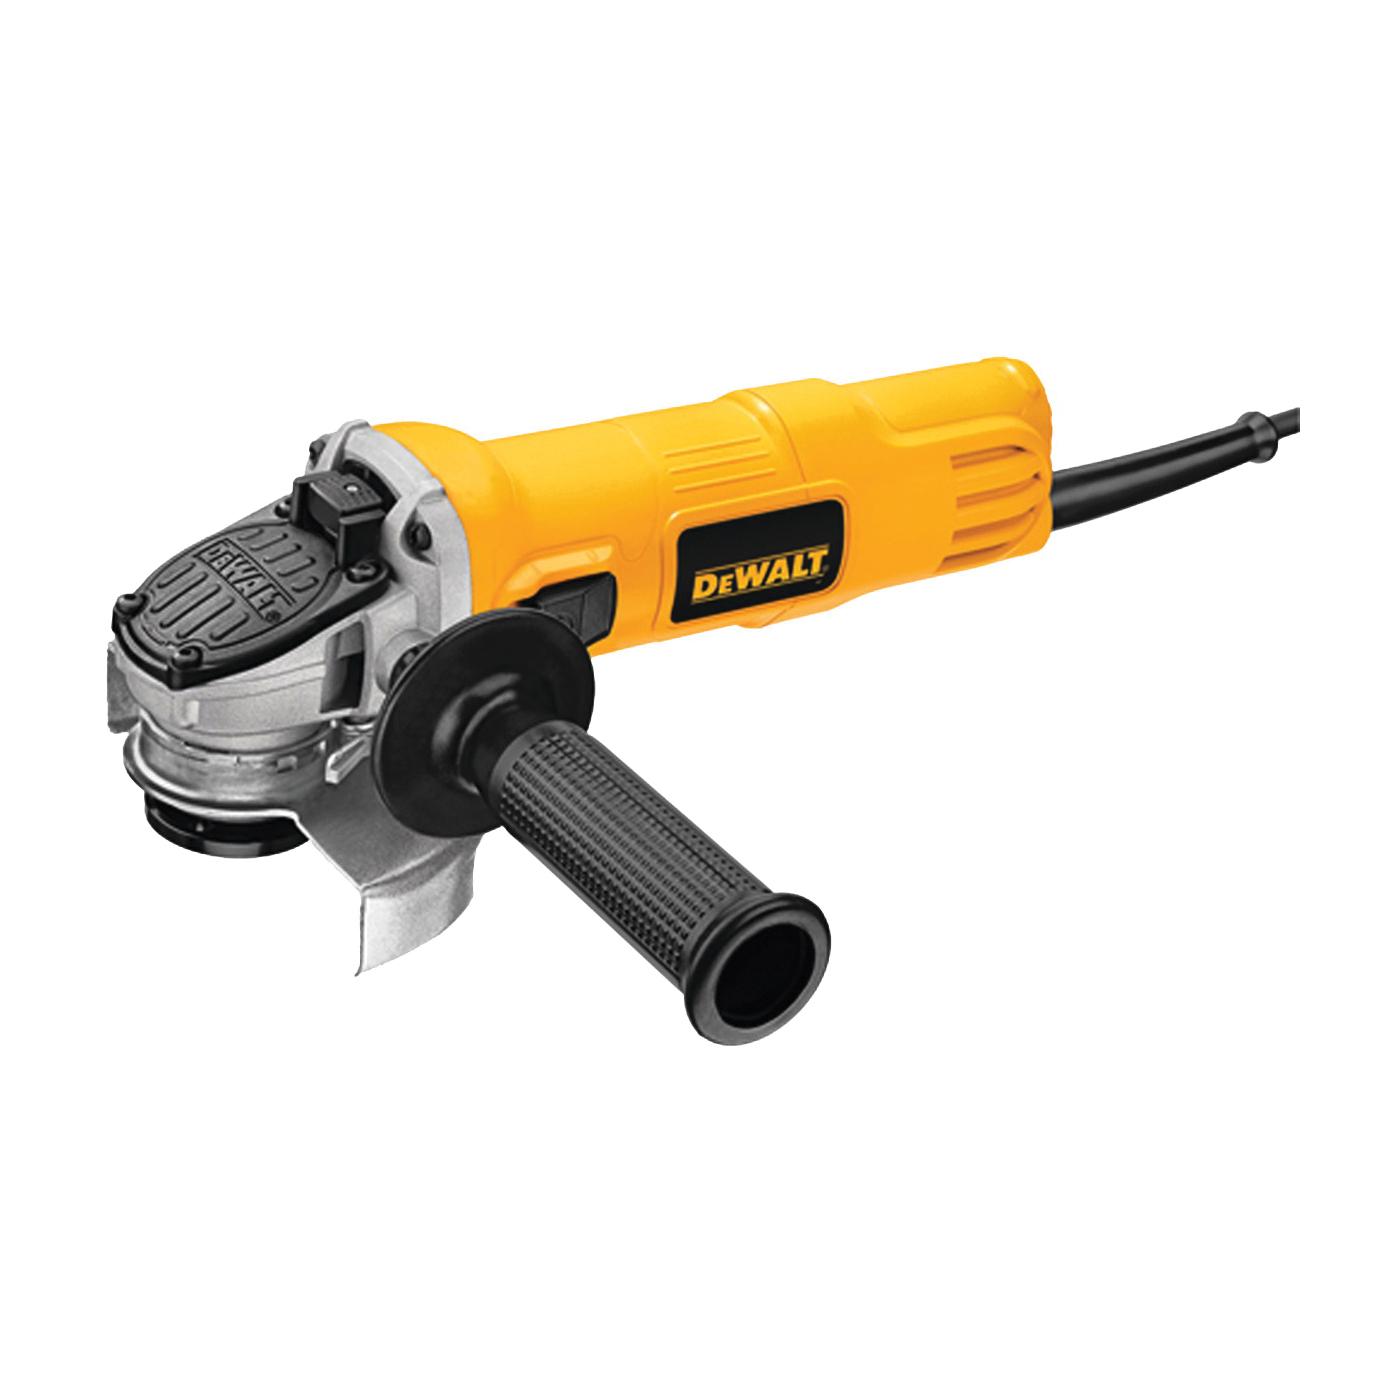 DWE4011 Angle Grinder, 5/8-11 Spindle, 4-1/2 in Dia Wheel, 12,000 rpm Speed